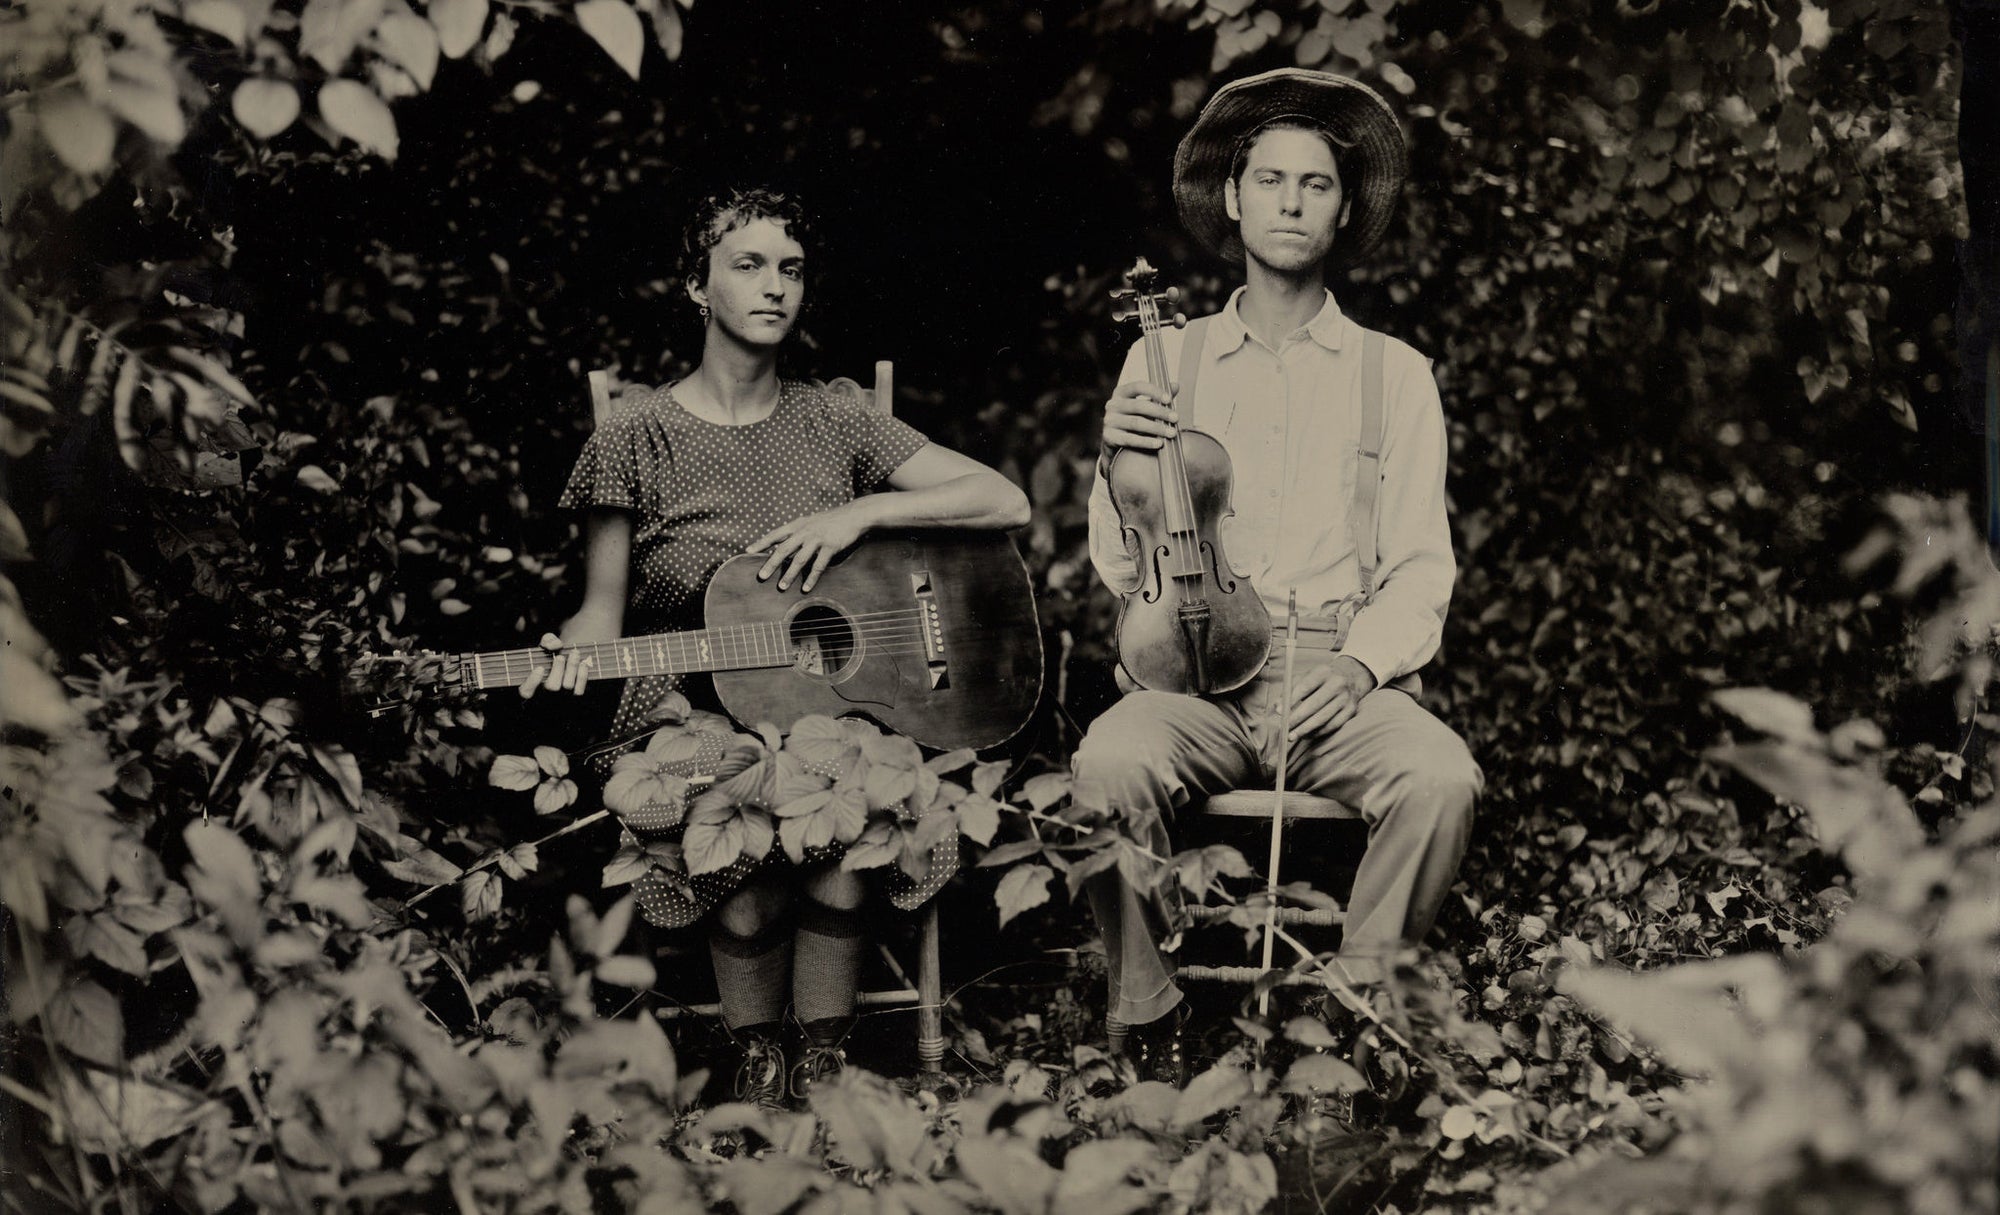 NYT: Tintype Portraits of Old-Time Musicians